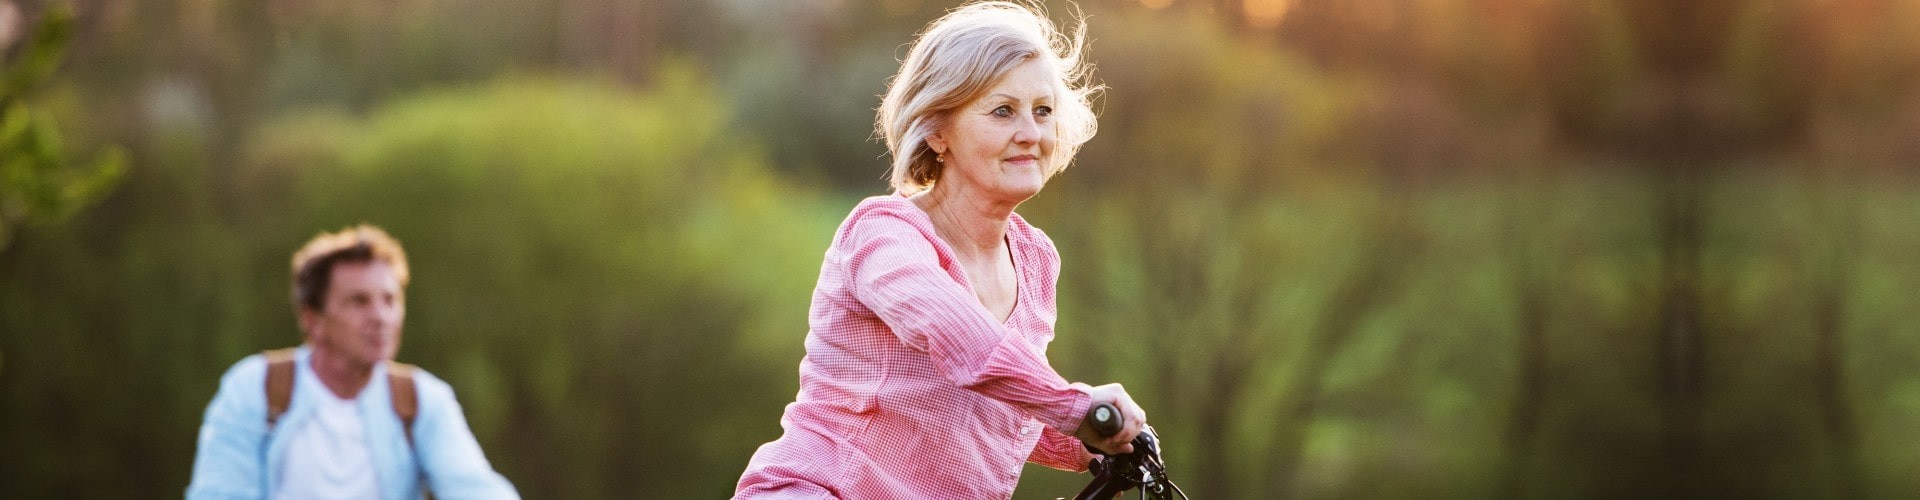 Seniors improve their lifestyle in San Diego, CA with a reverse mortgage from the Harmes team.